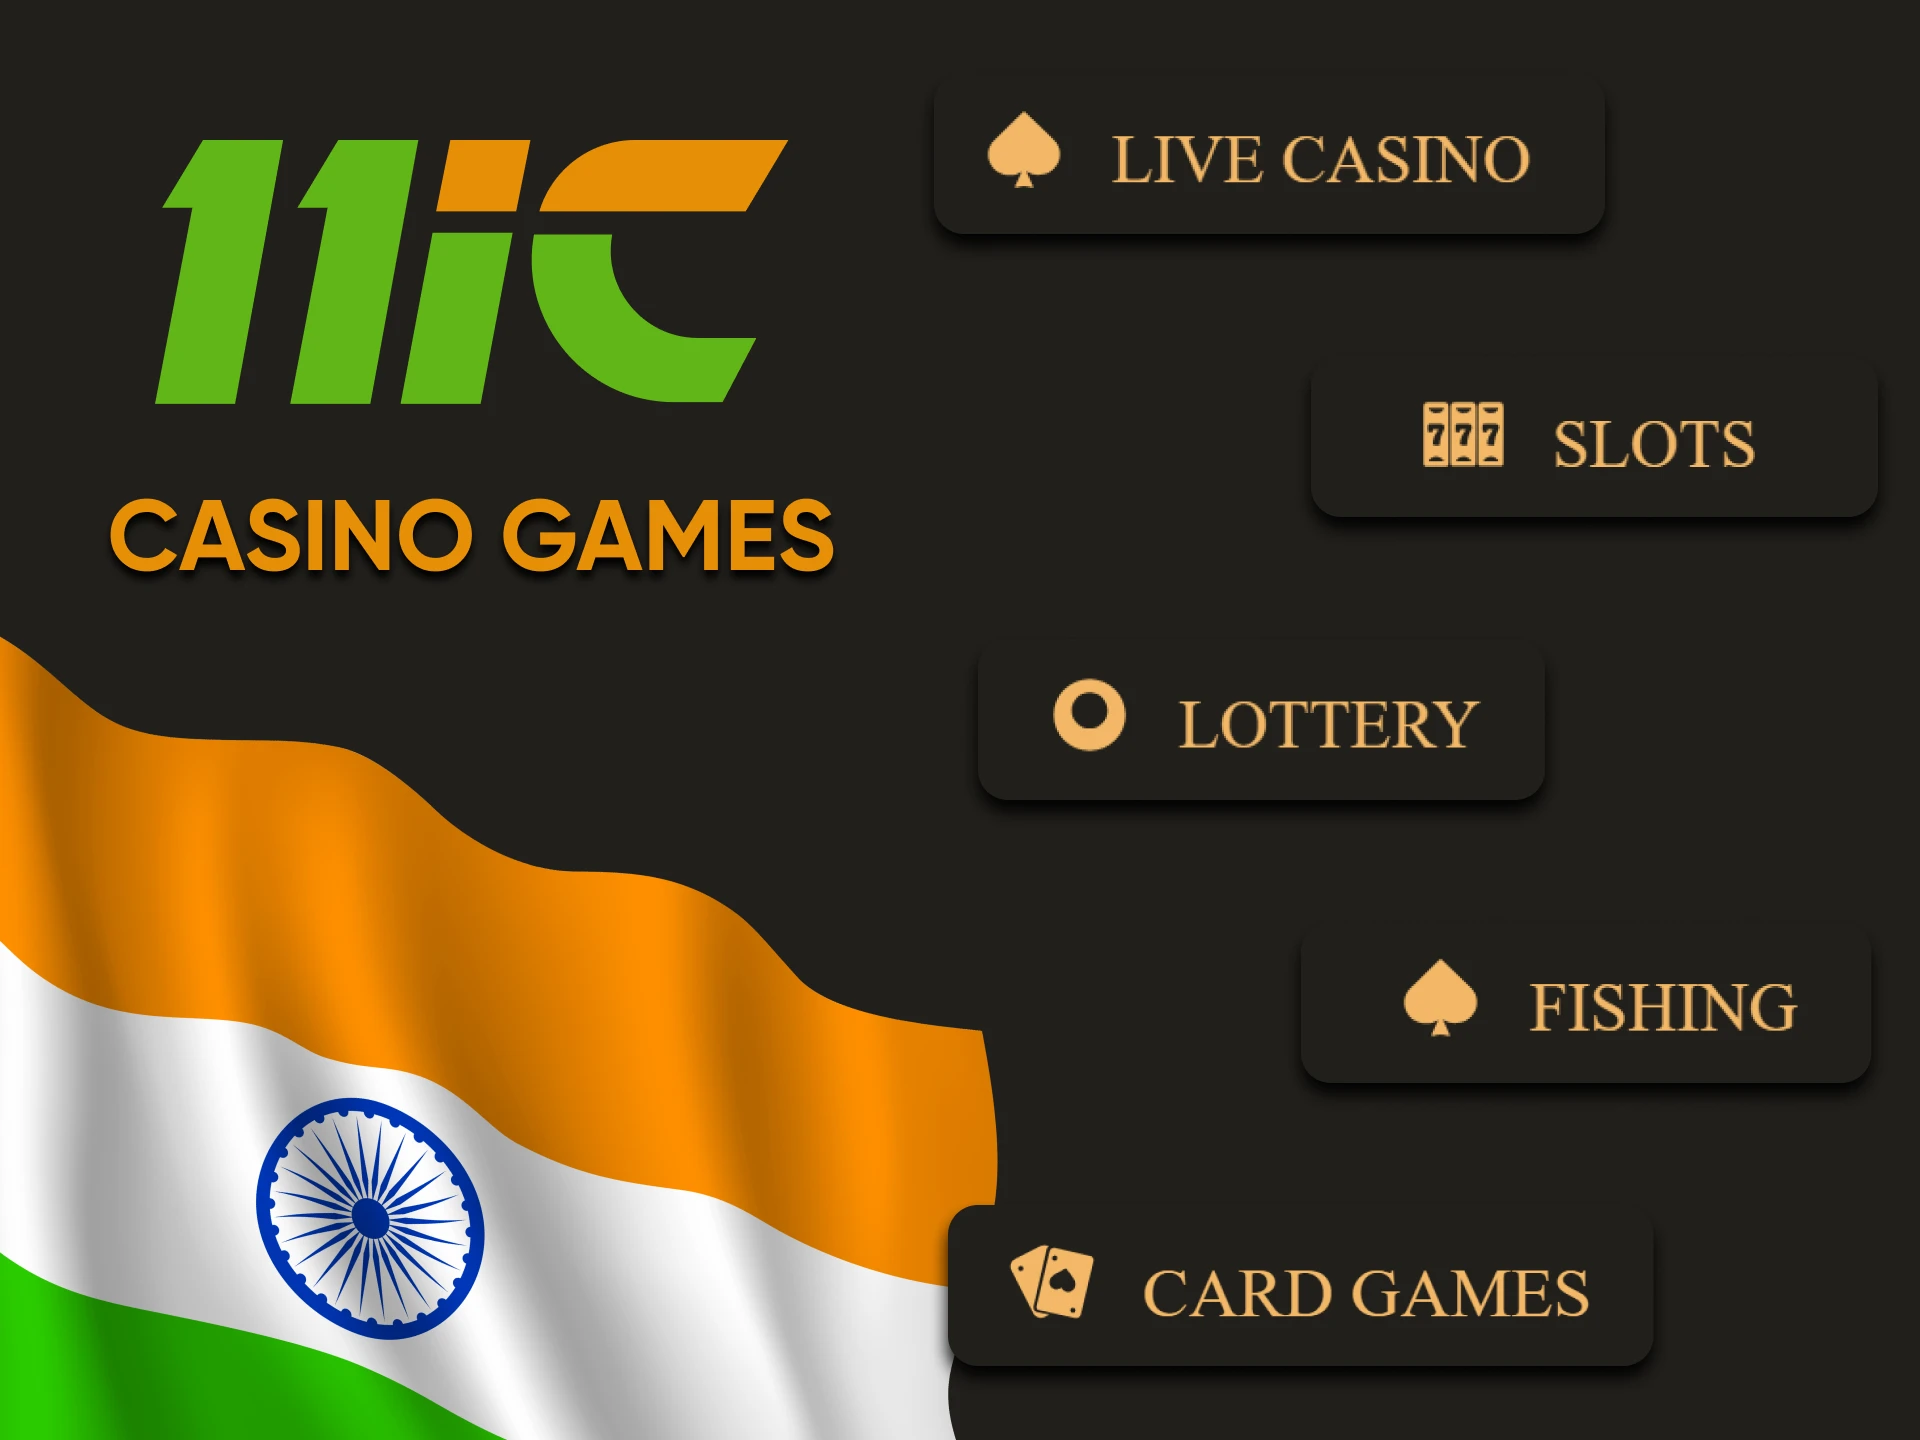 Play casino on the 11ic website.